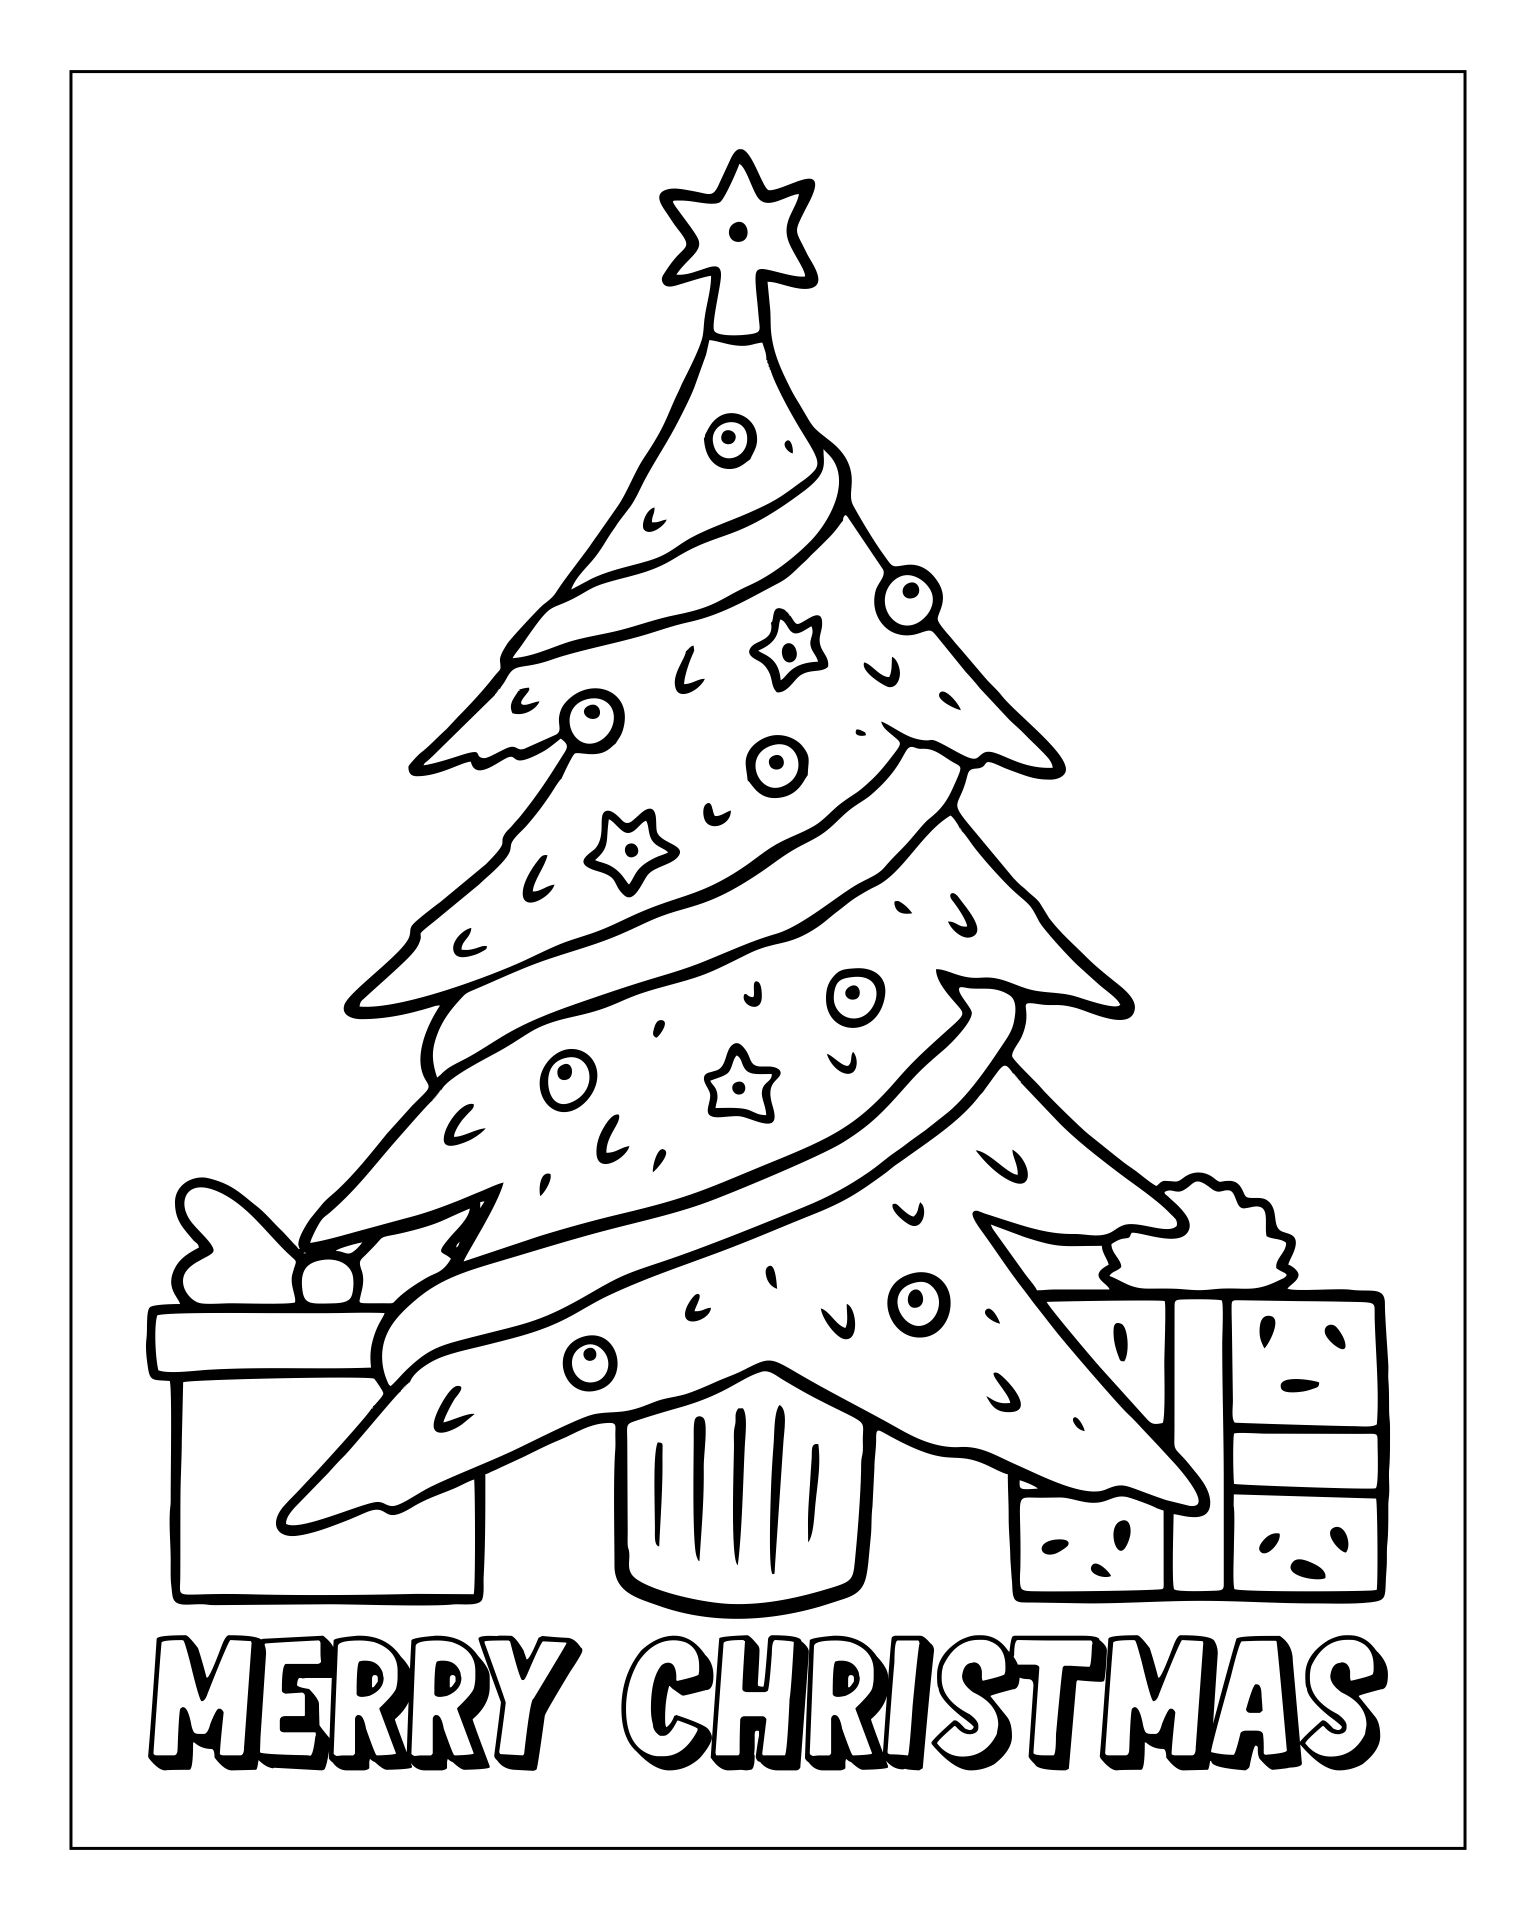 Christmas Tree Coloring Pages And Greeting Cards